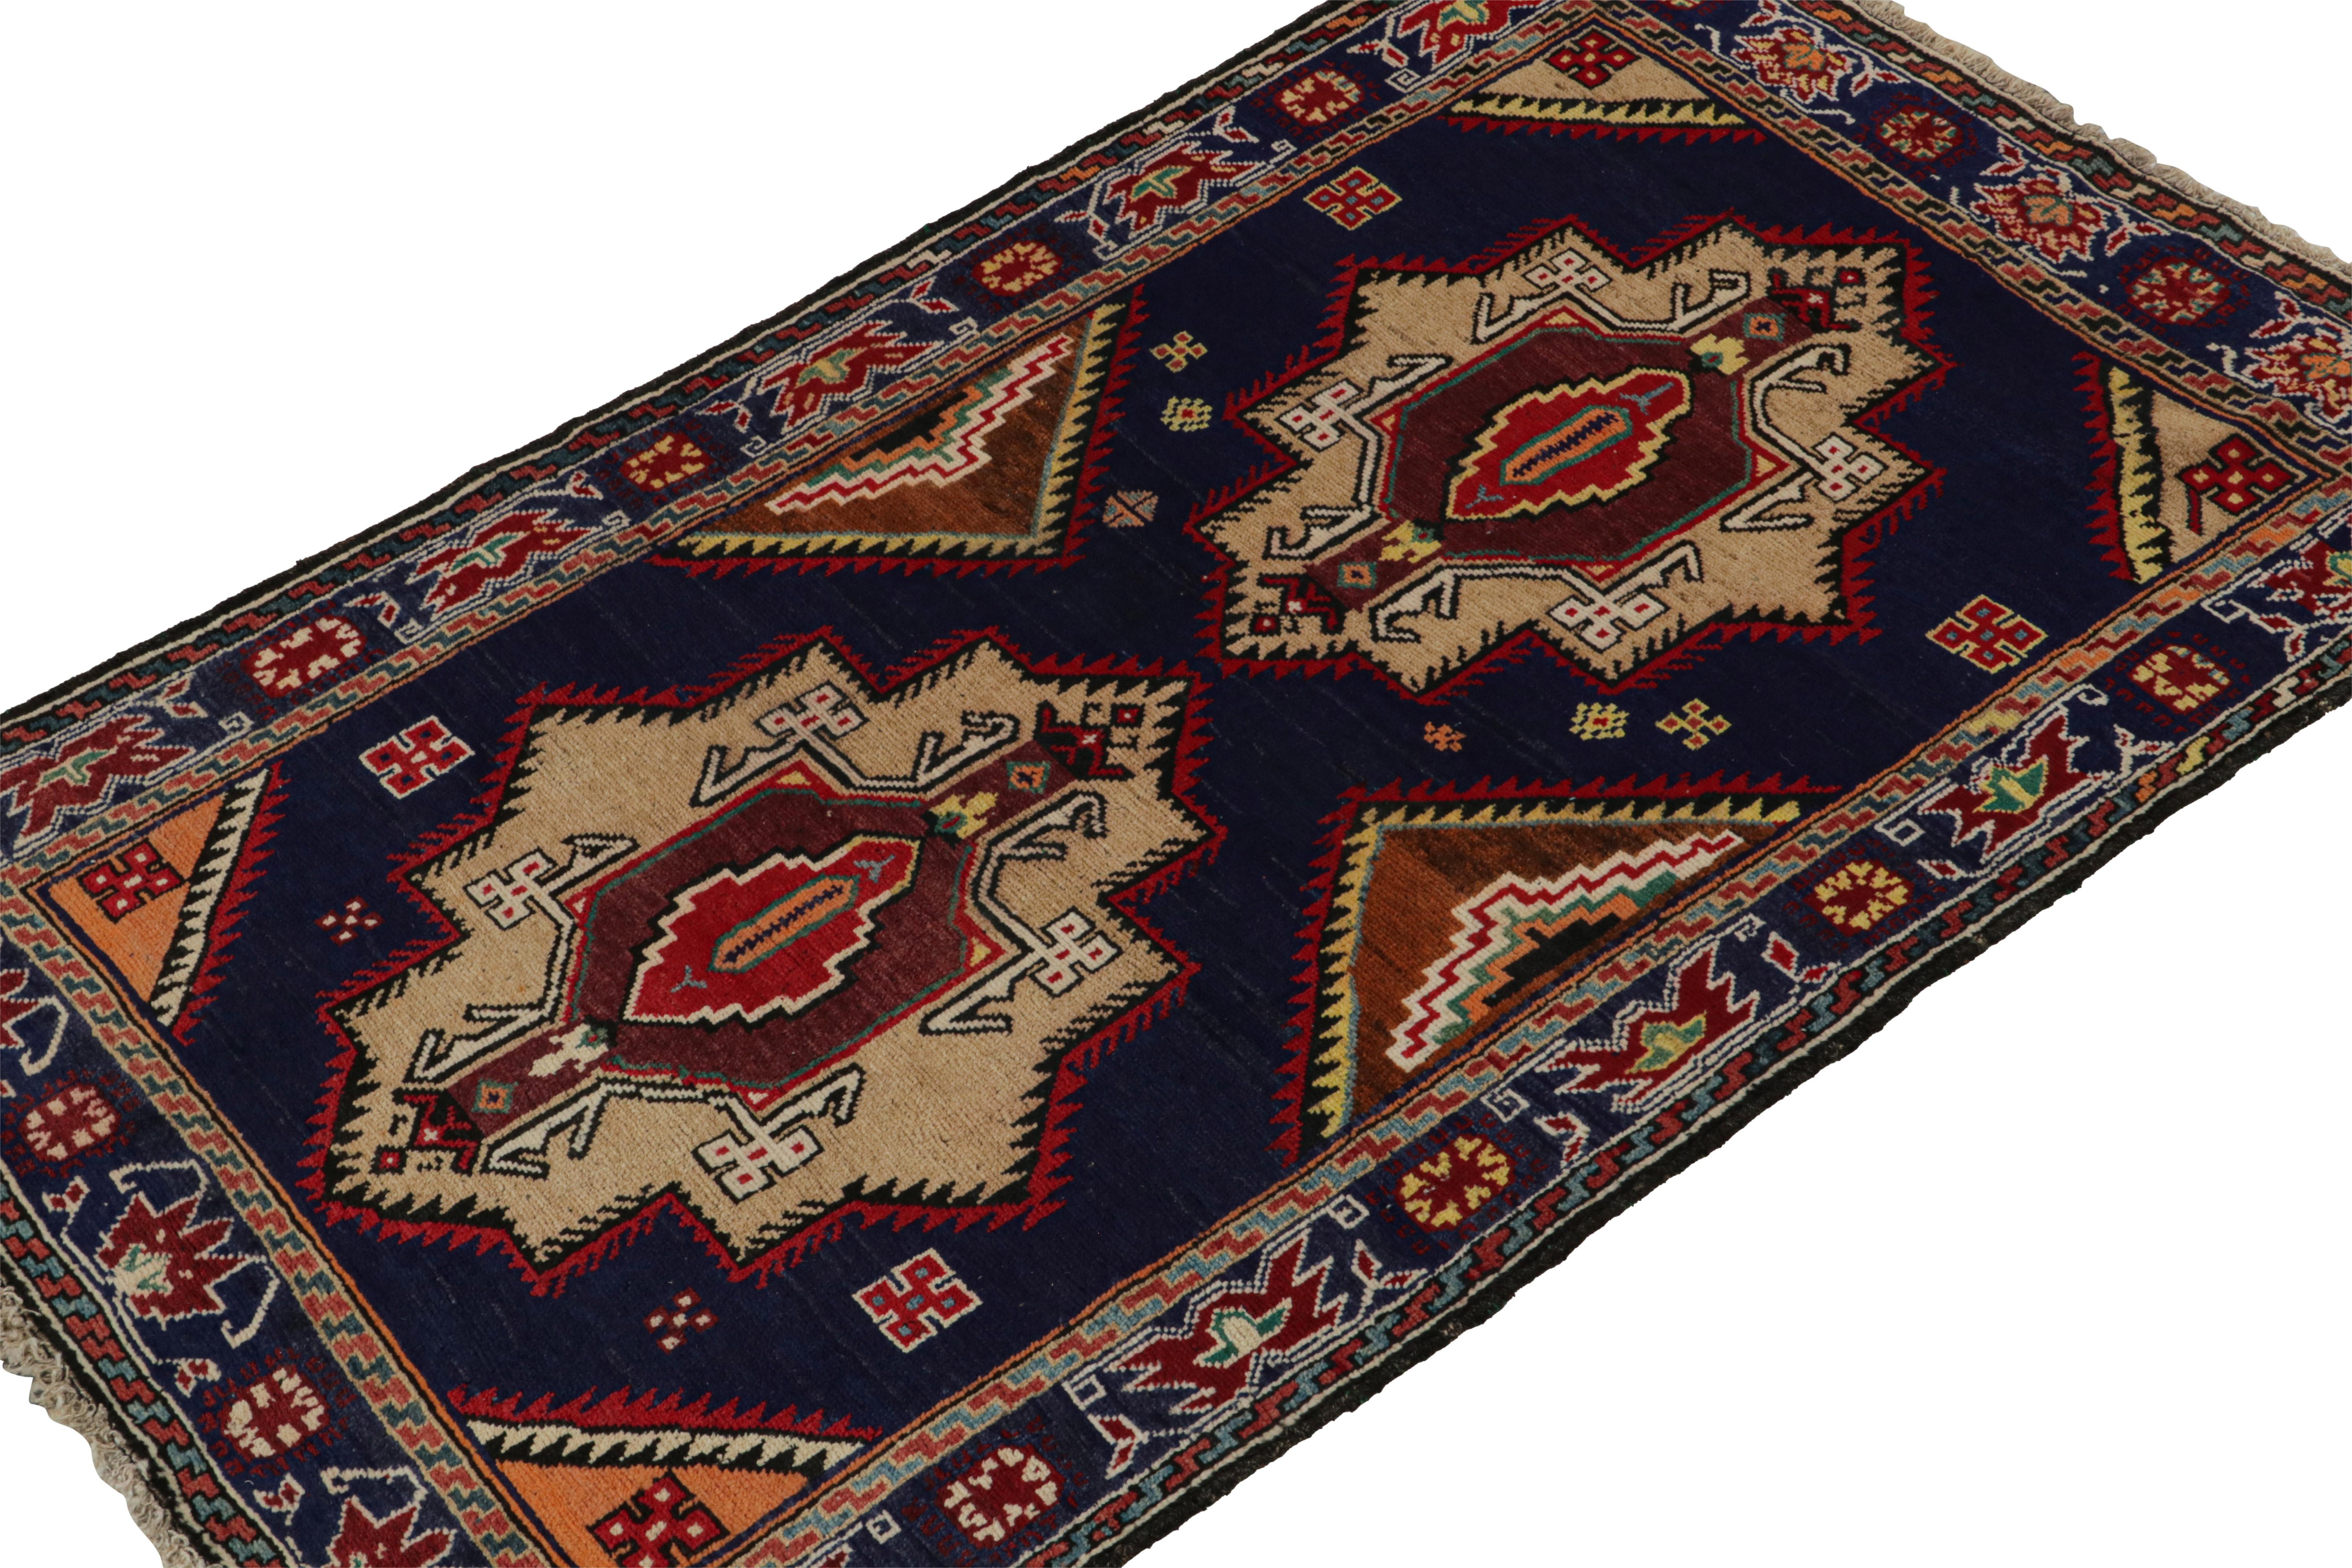 Hand-knotted in wool and goat hair circa 1950-1960, this 4x7 vintage Baluch tribal rug is a new curation from Rug & Kilim. 

On the Design:

This design enjoys rich brown medallions on a navy blue field, with red and white in the most present accent